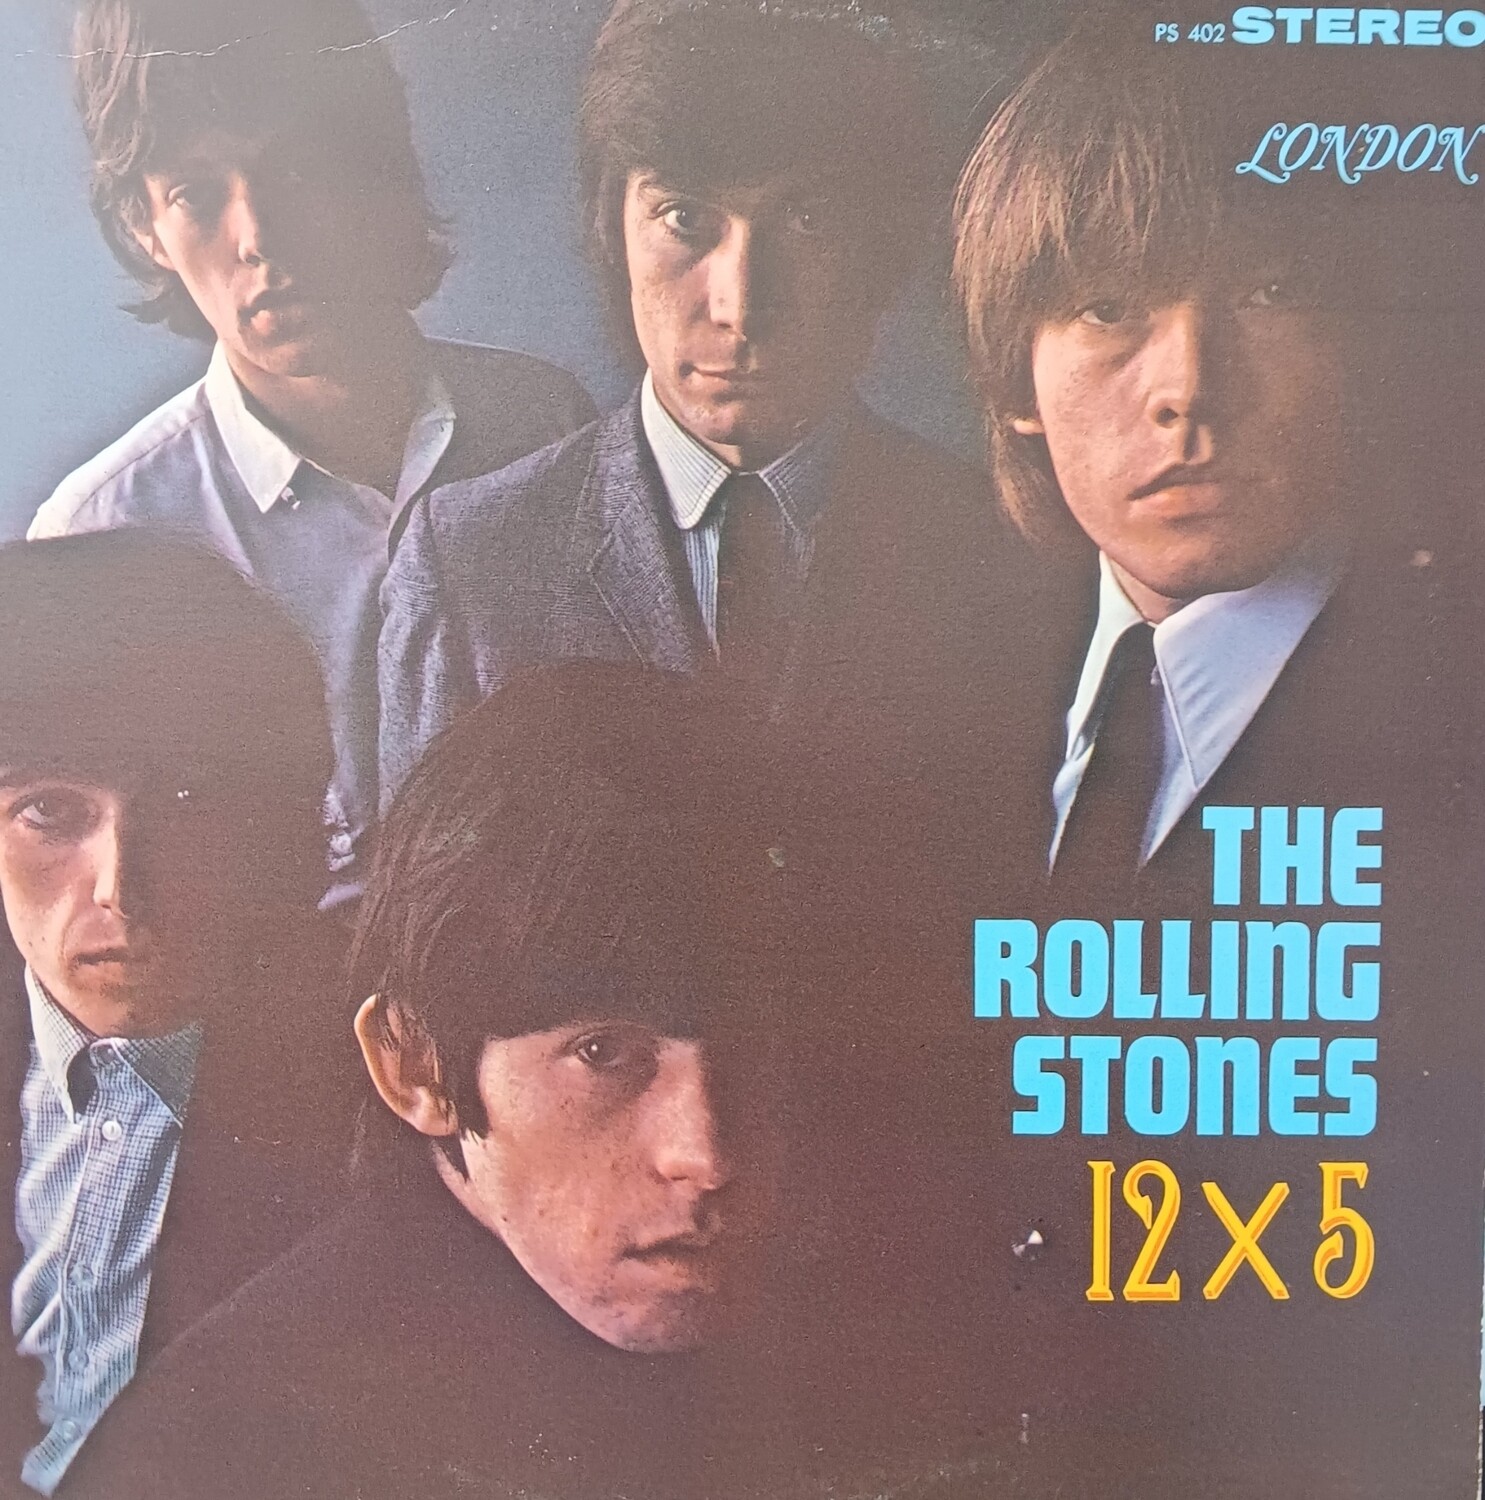 THE ROLLING STONES - 12 X 5